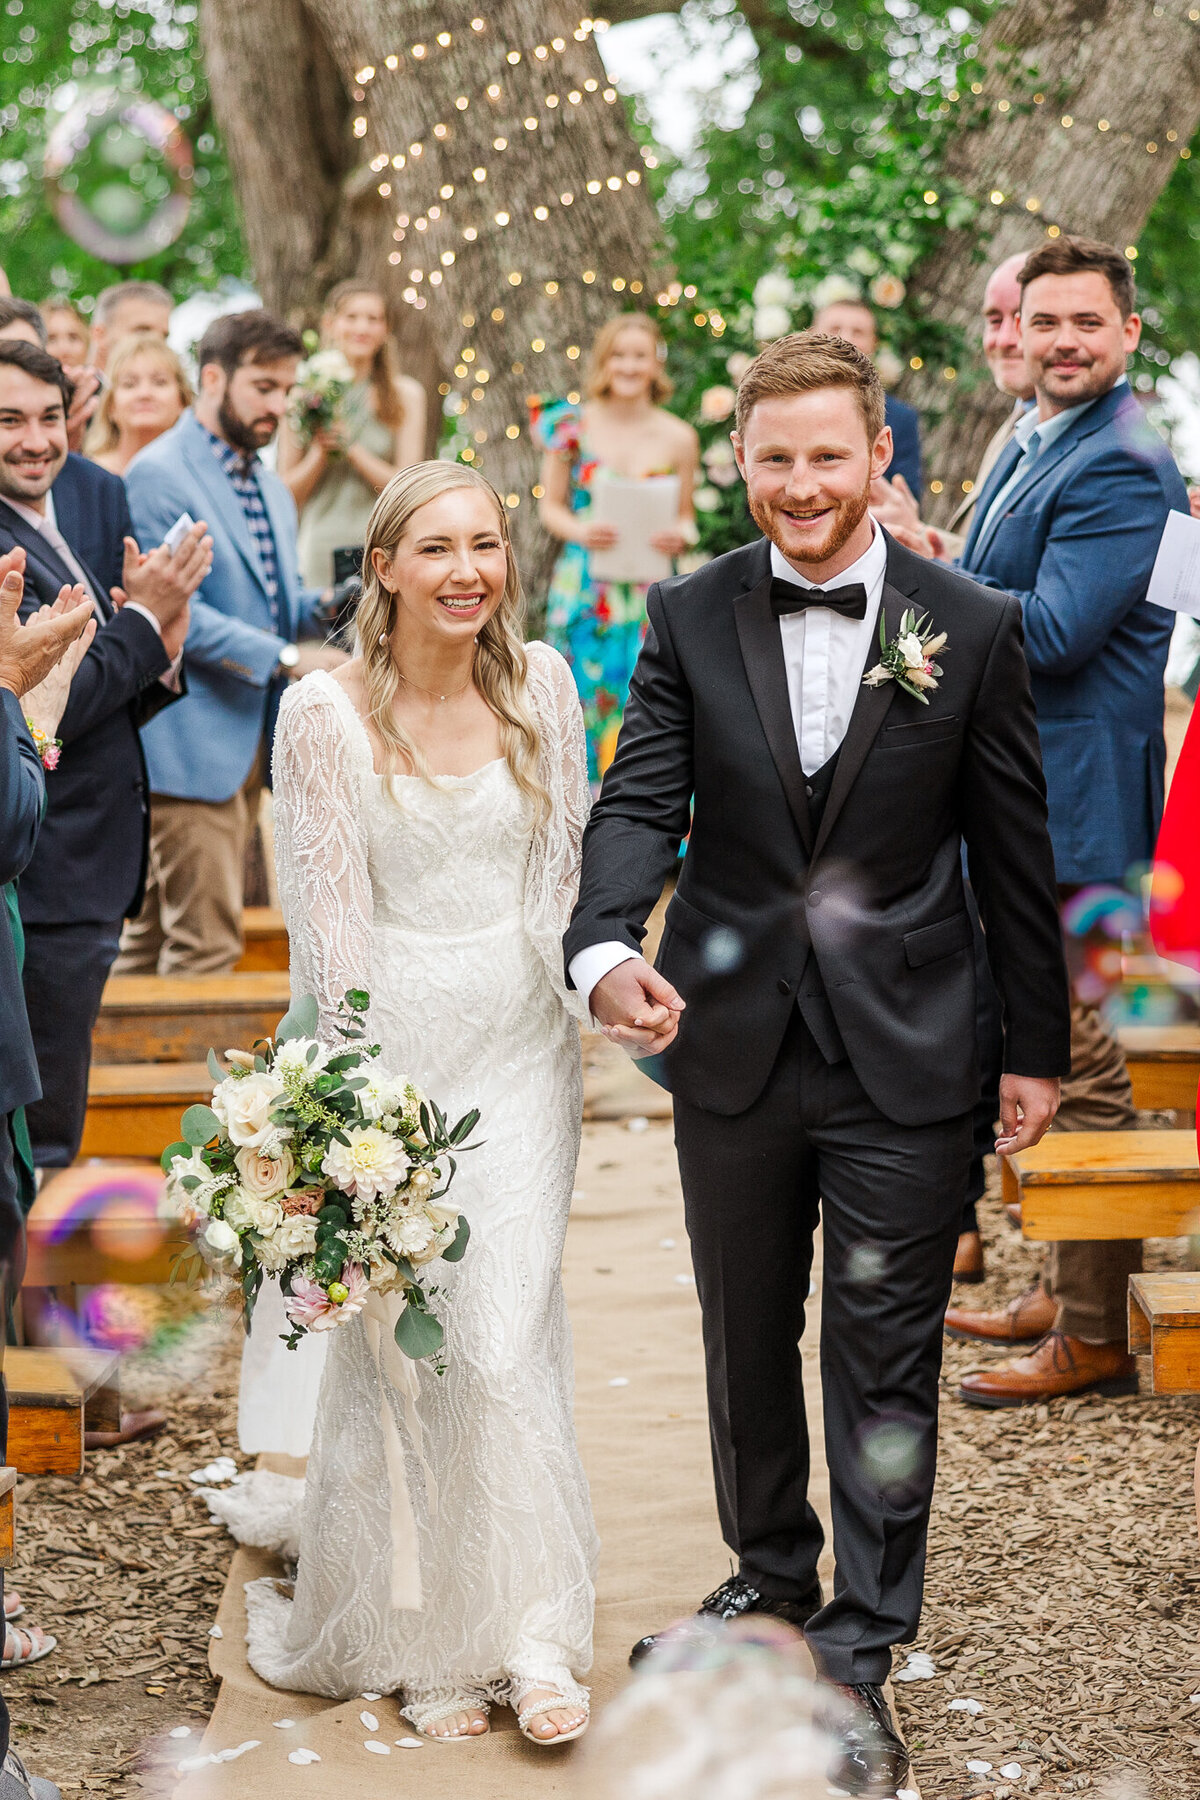 Bride and groom walk down aisle holding hands and smiling as bubbles surround them